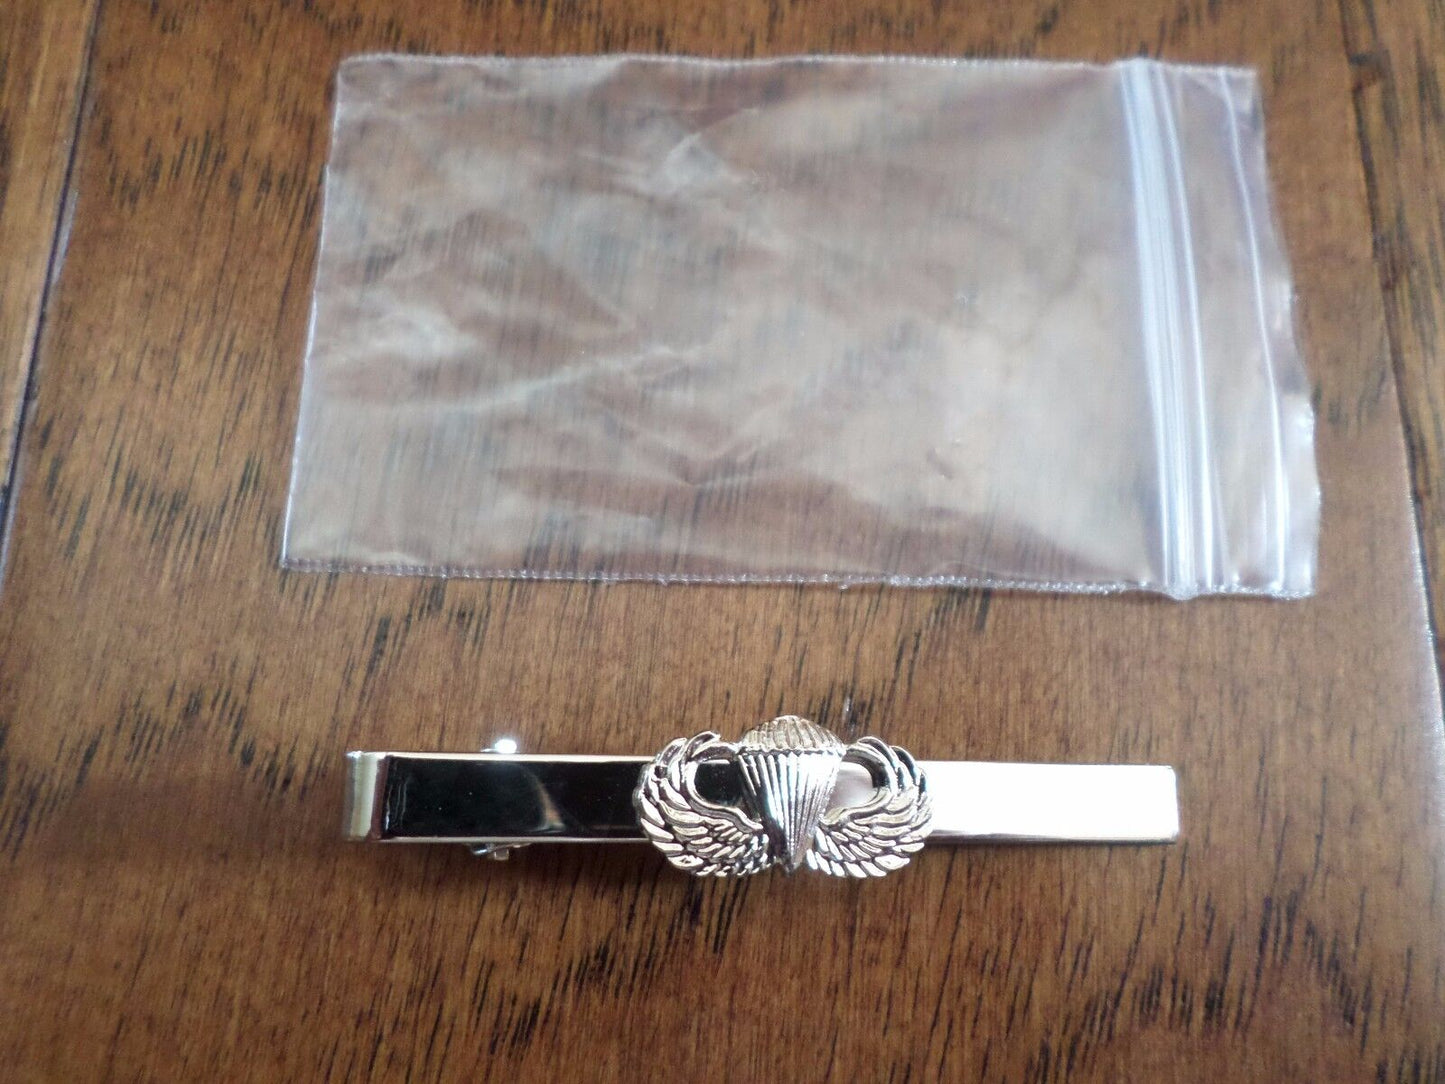 U.S MILITARY ARMY JUMP WINGS TIE BAR OR TIE TAC U.S.A MADE